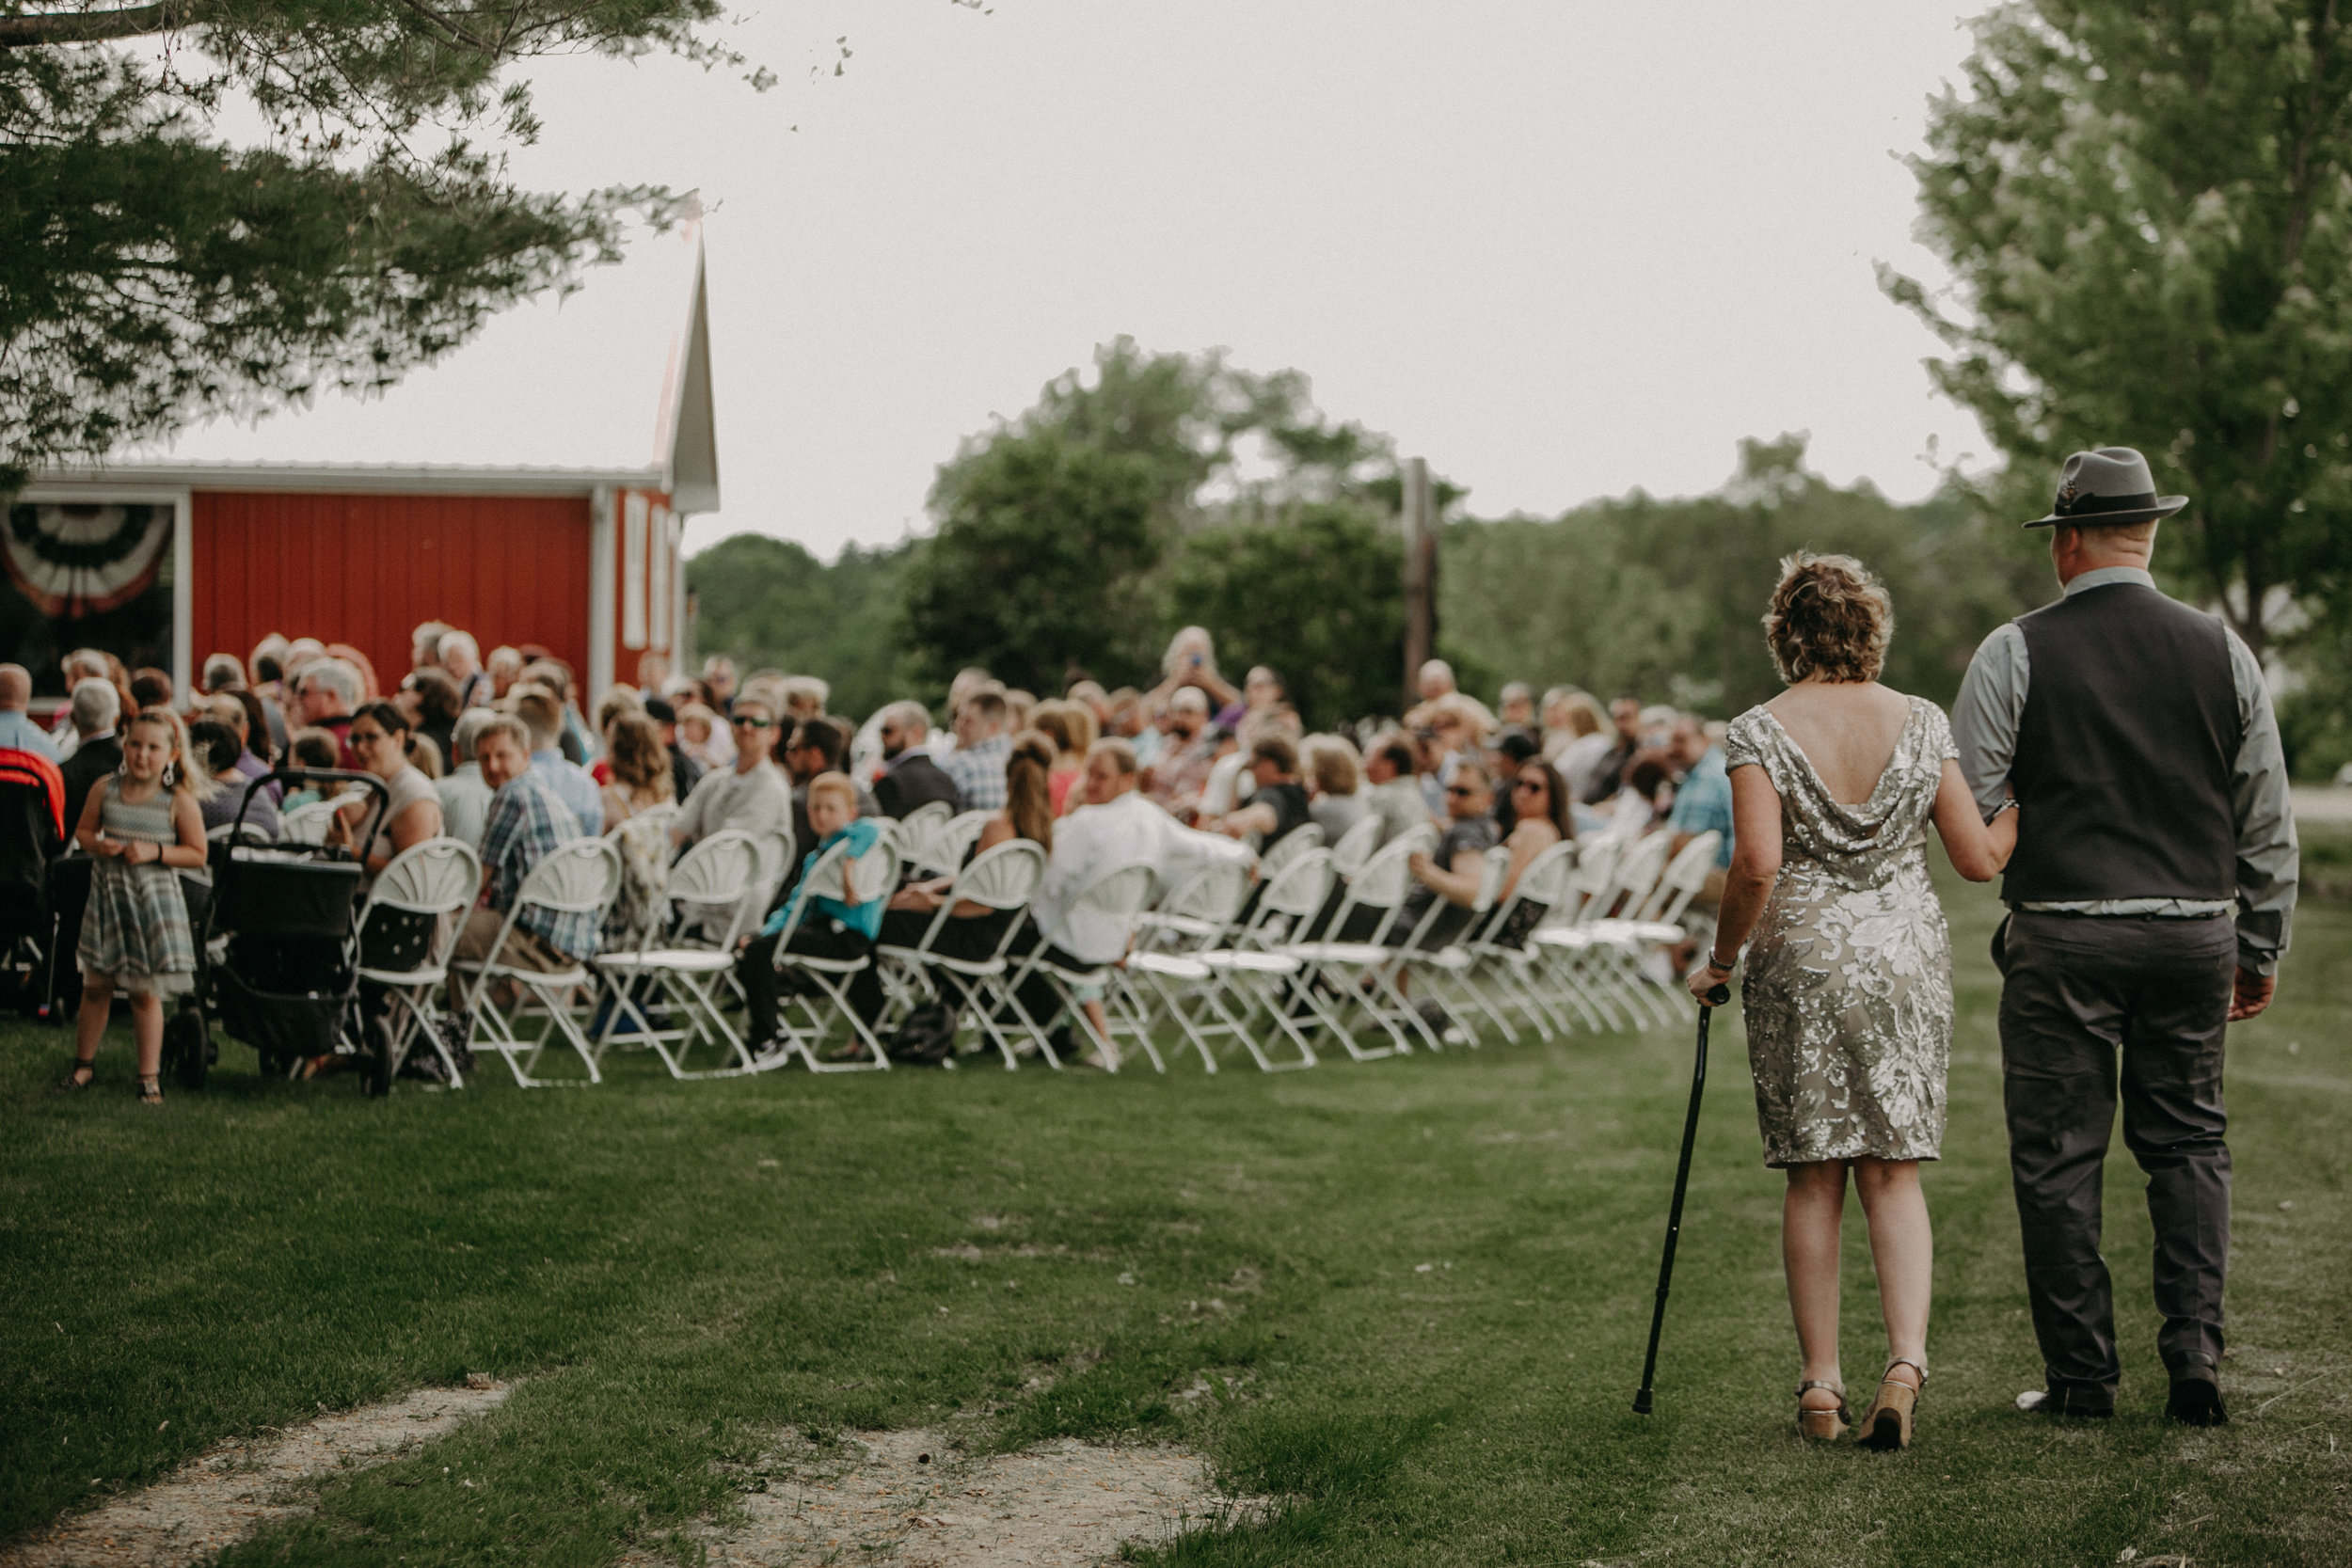  Ellsworth WI wedding photographer Andrea Wagner captures a moment where the groom walks his mother down the aisle at Jean Acres Barn 